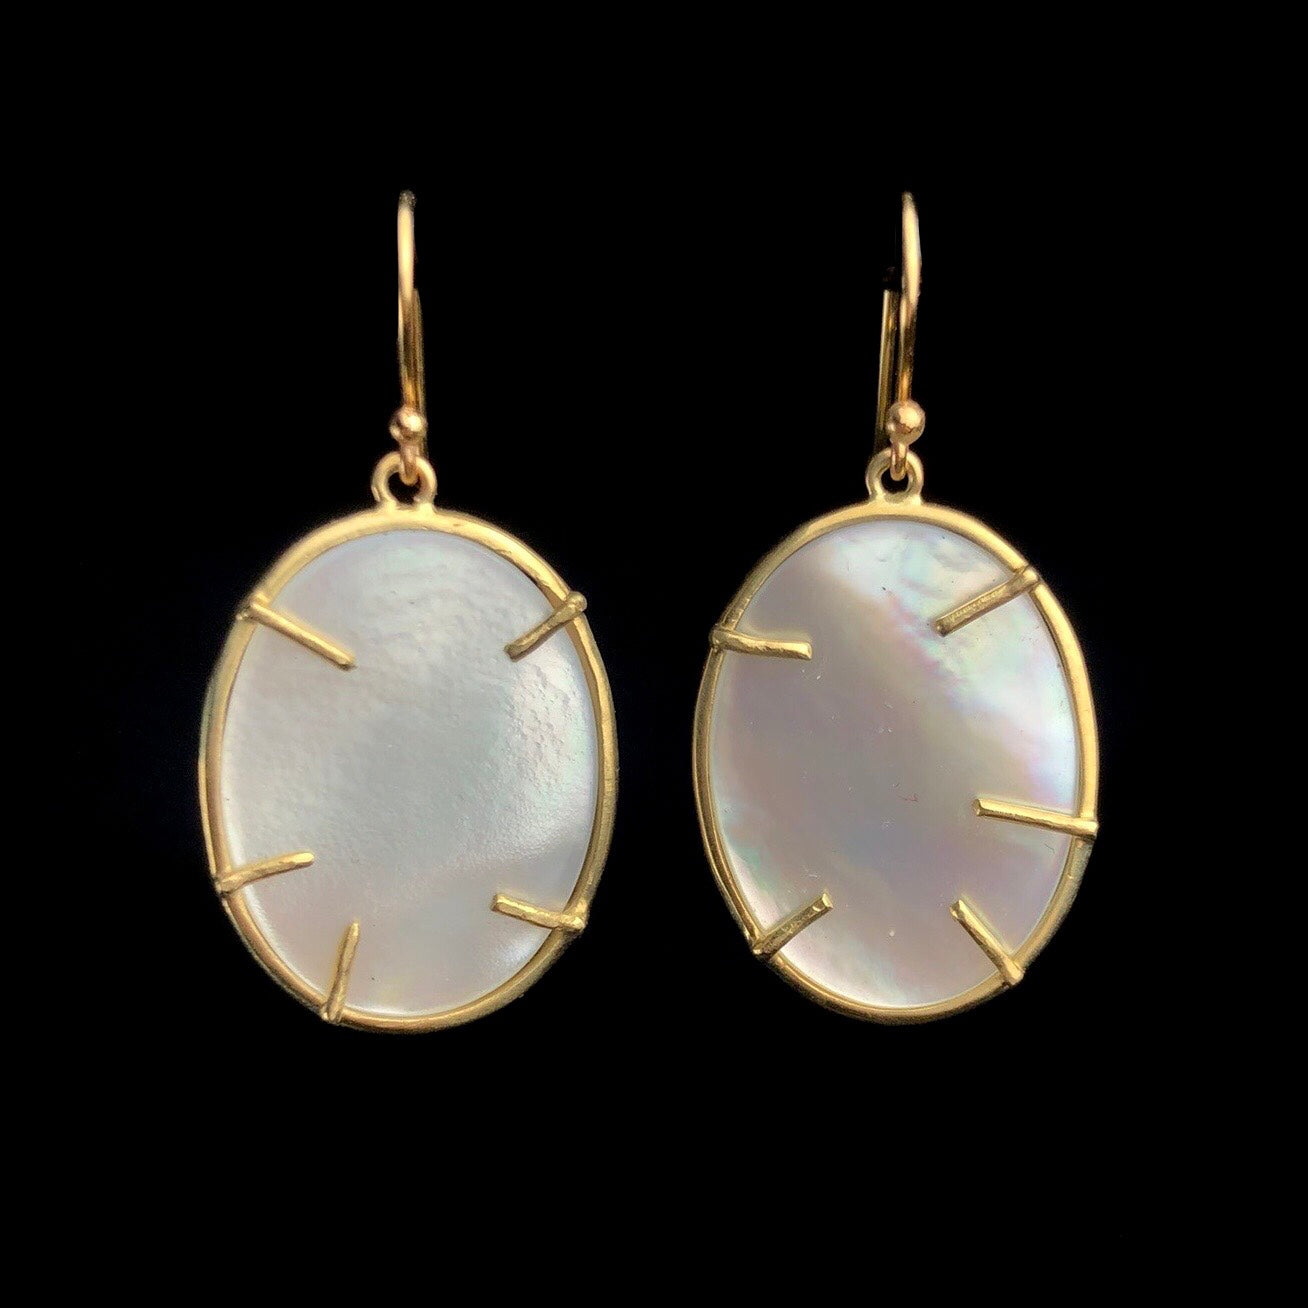 Iridescent white oval discs with gold prong settings on gold earring hooks